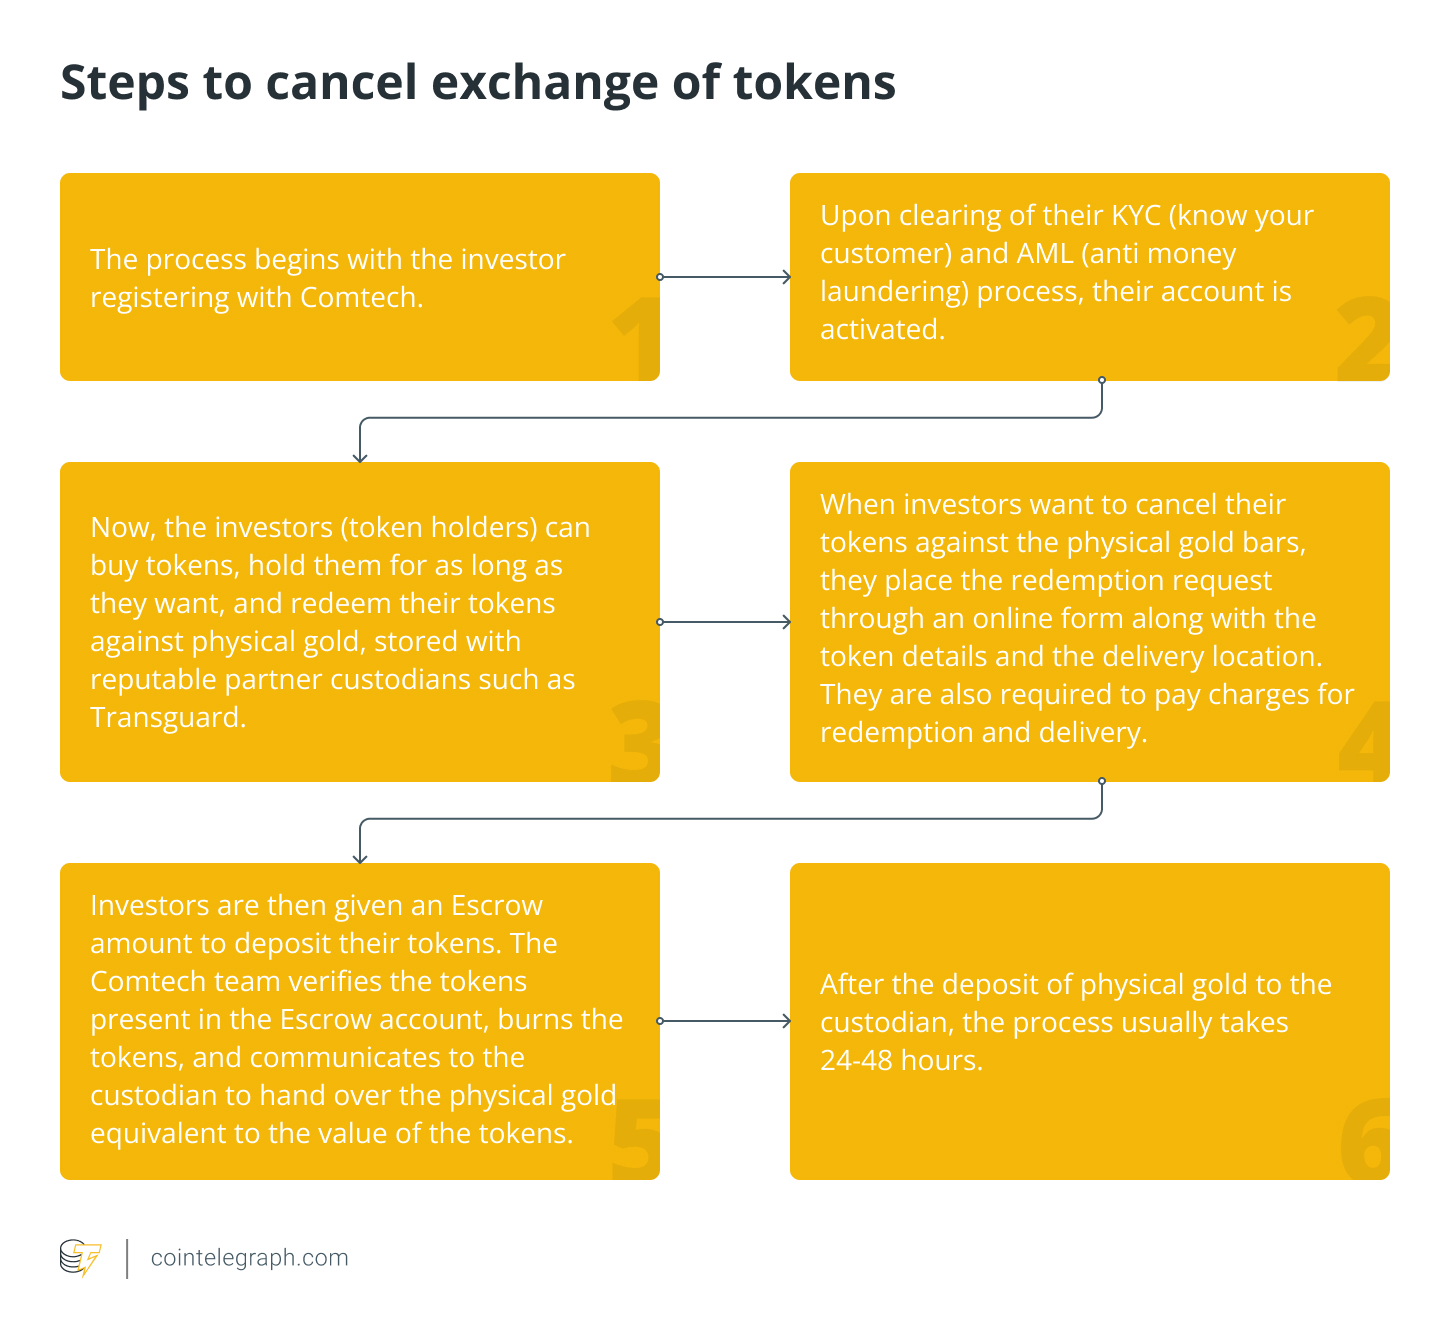 Steps to cancel exchange of tokens